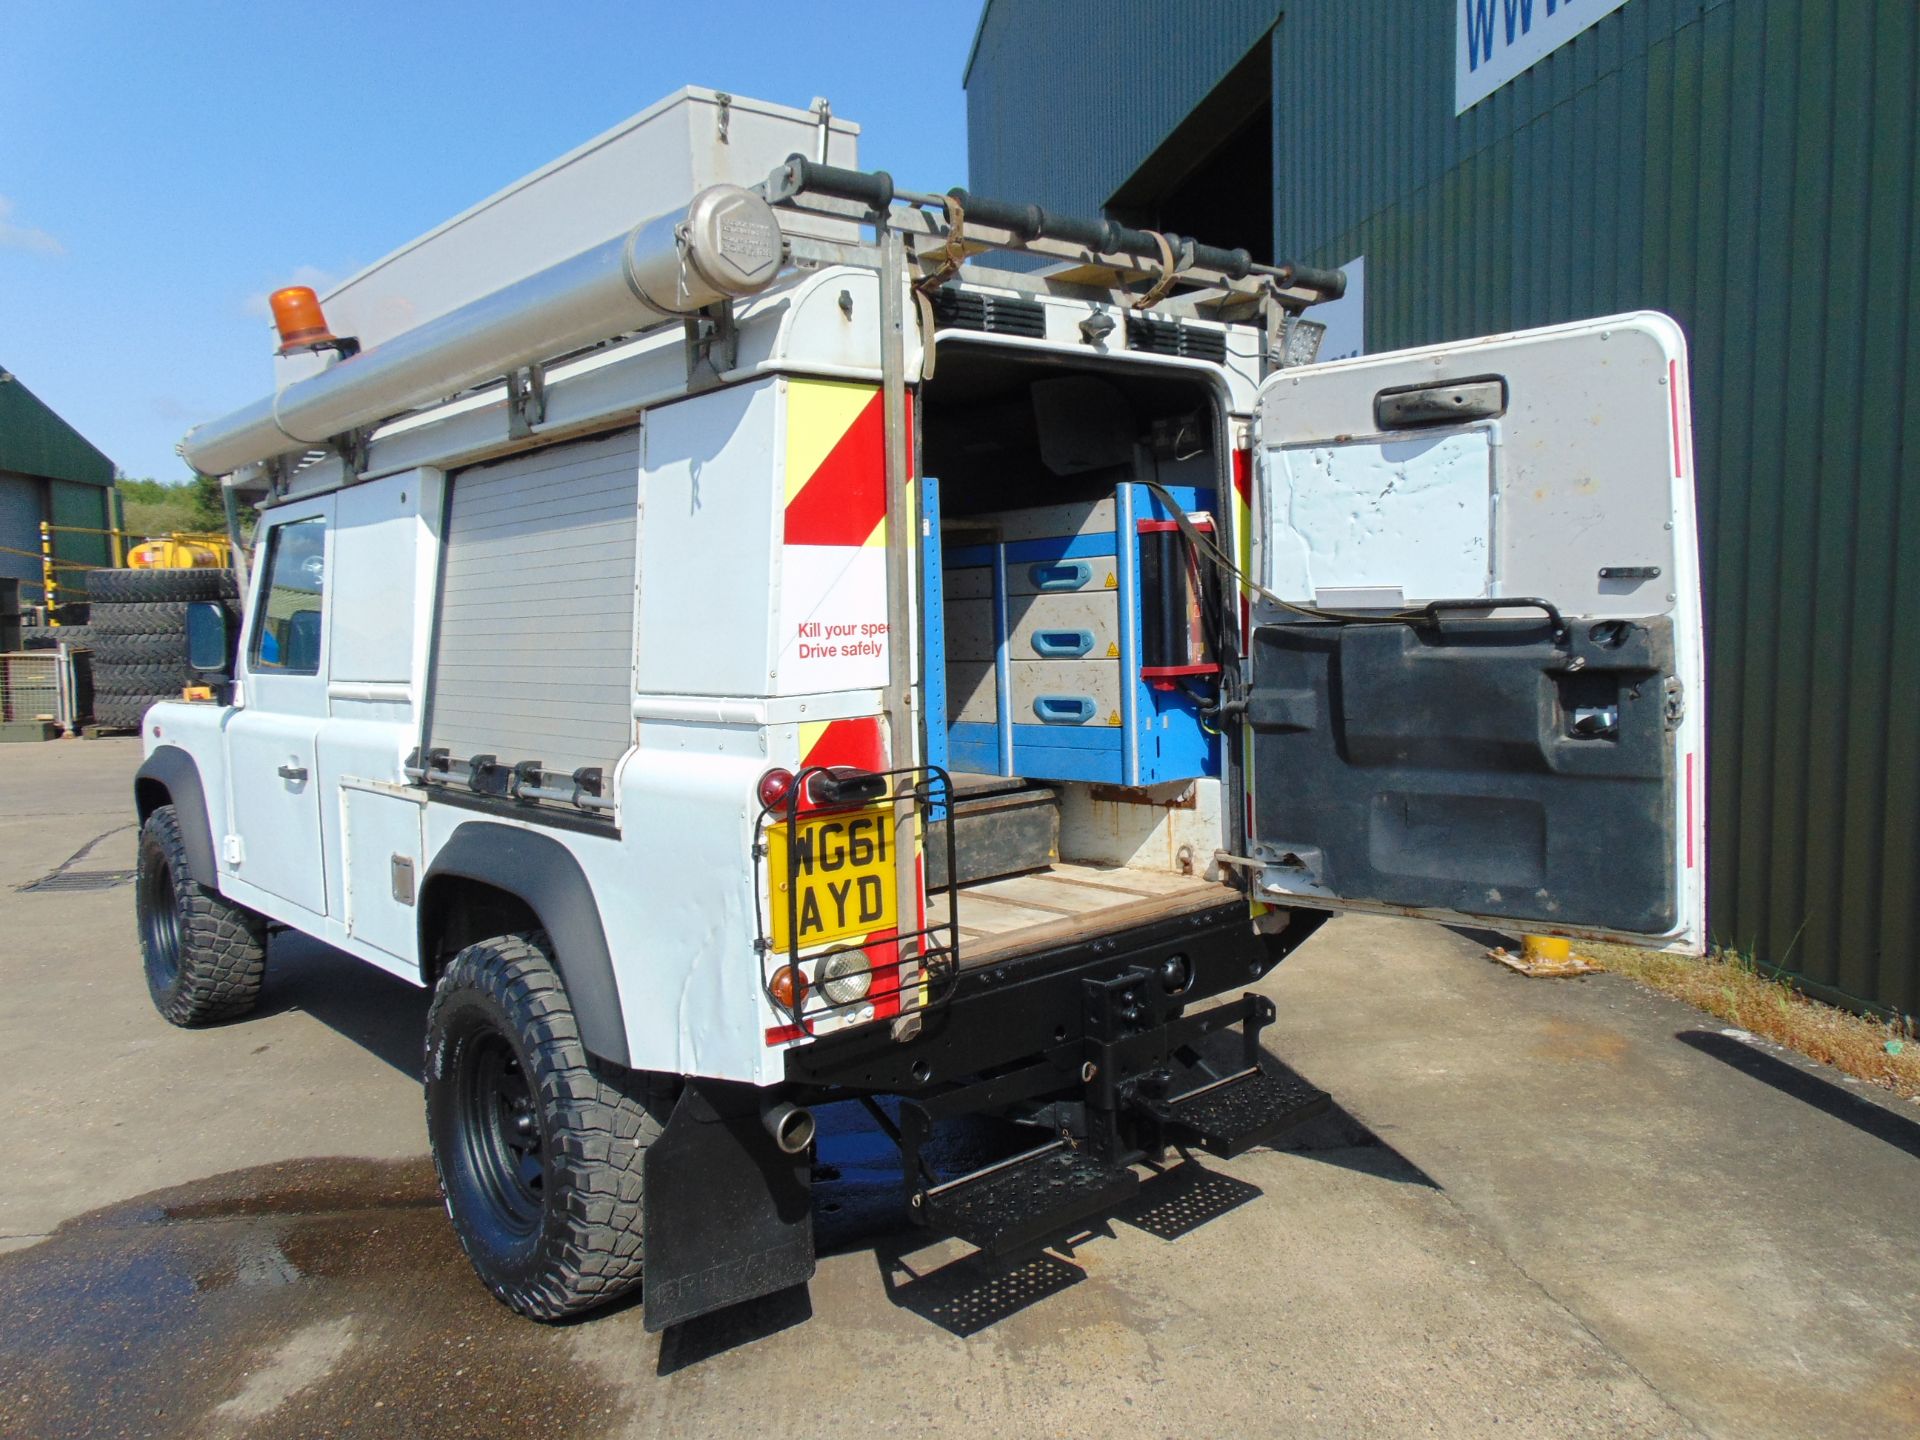 2011 Land Rover Defender 110 Puma hardtop 4x4 Utility vehicle (mobile workshop) with hydraulic winch - Image 26 of 53